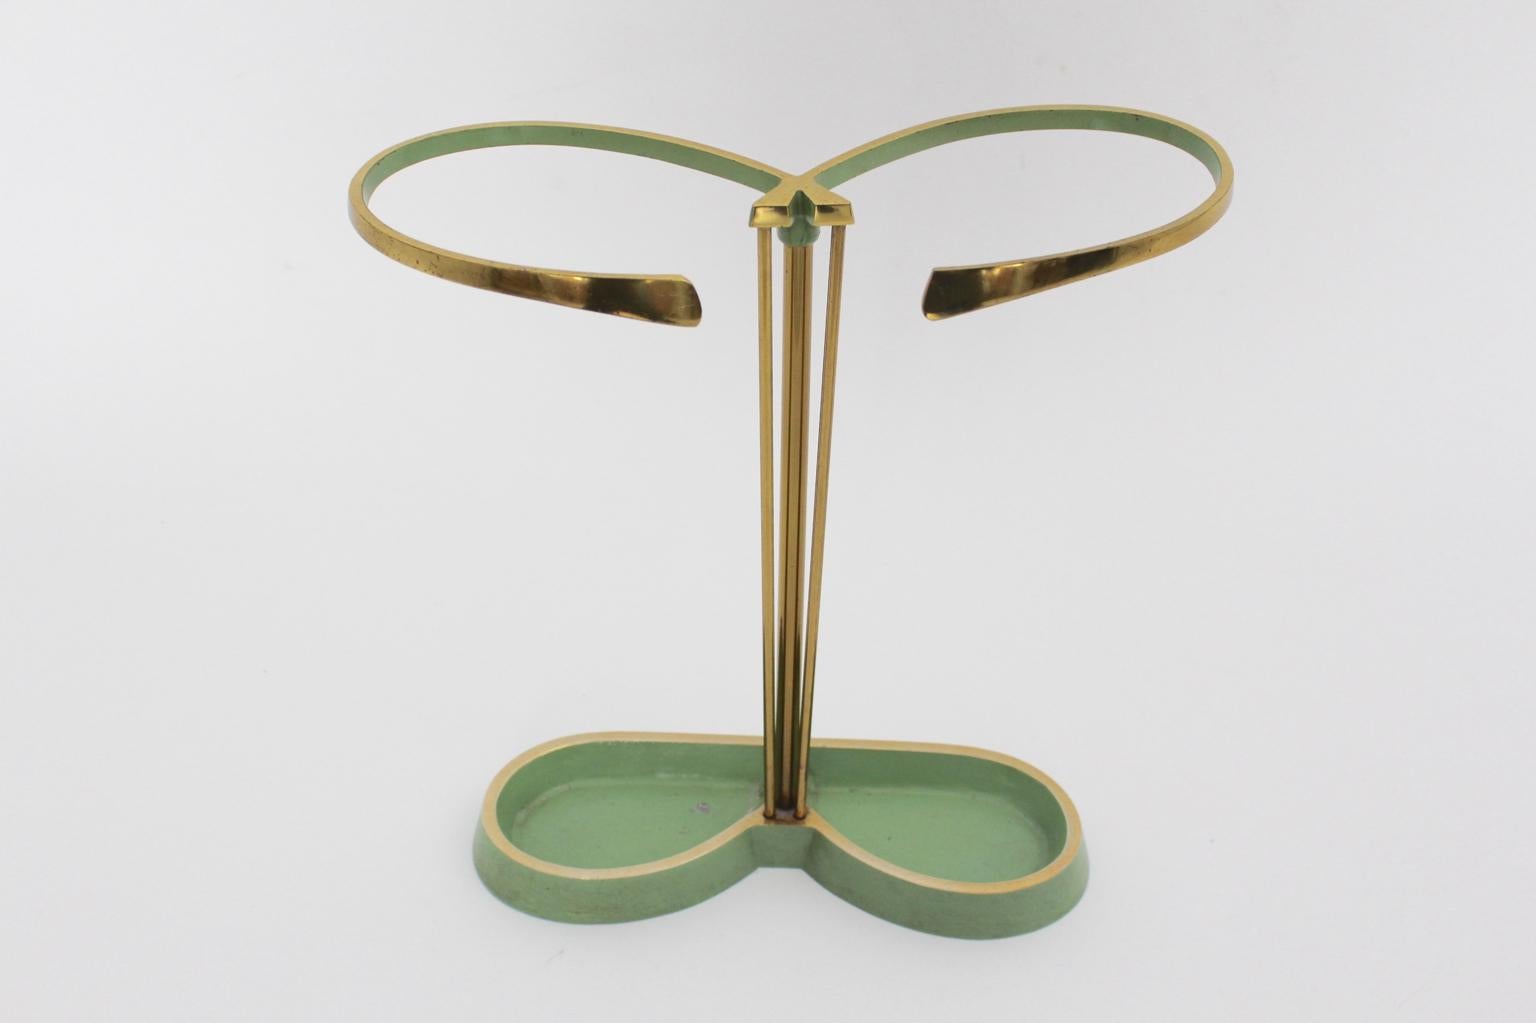 Mid Century Modern vintage umbrella from brass and cast aluminum - partly pistachio green lacquered 1950s Austria.
This stunning umbrella stand was designed and made in Austria 1950 and is in original good condition - ready to live.

approx.